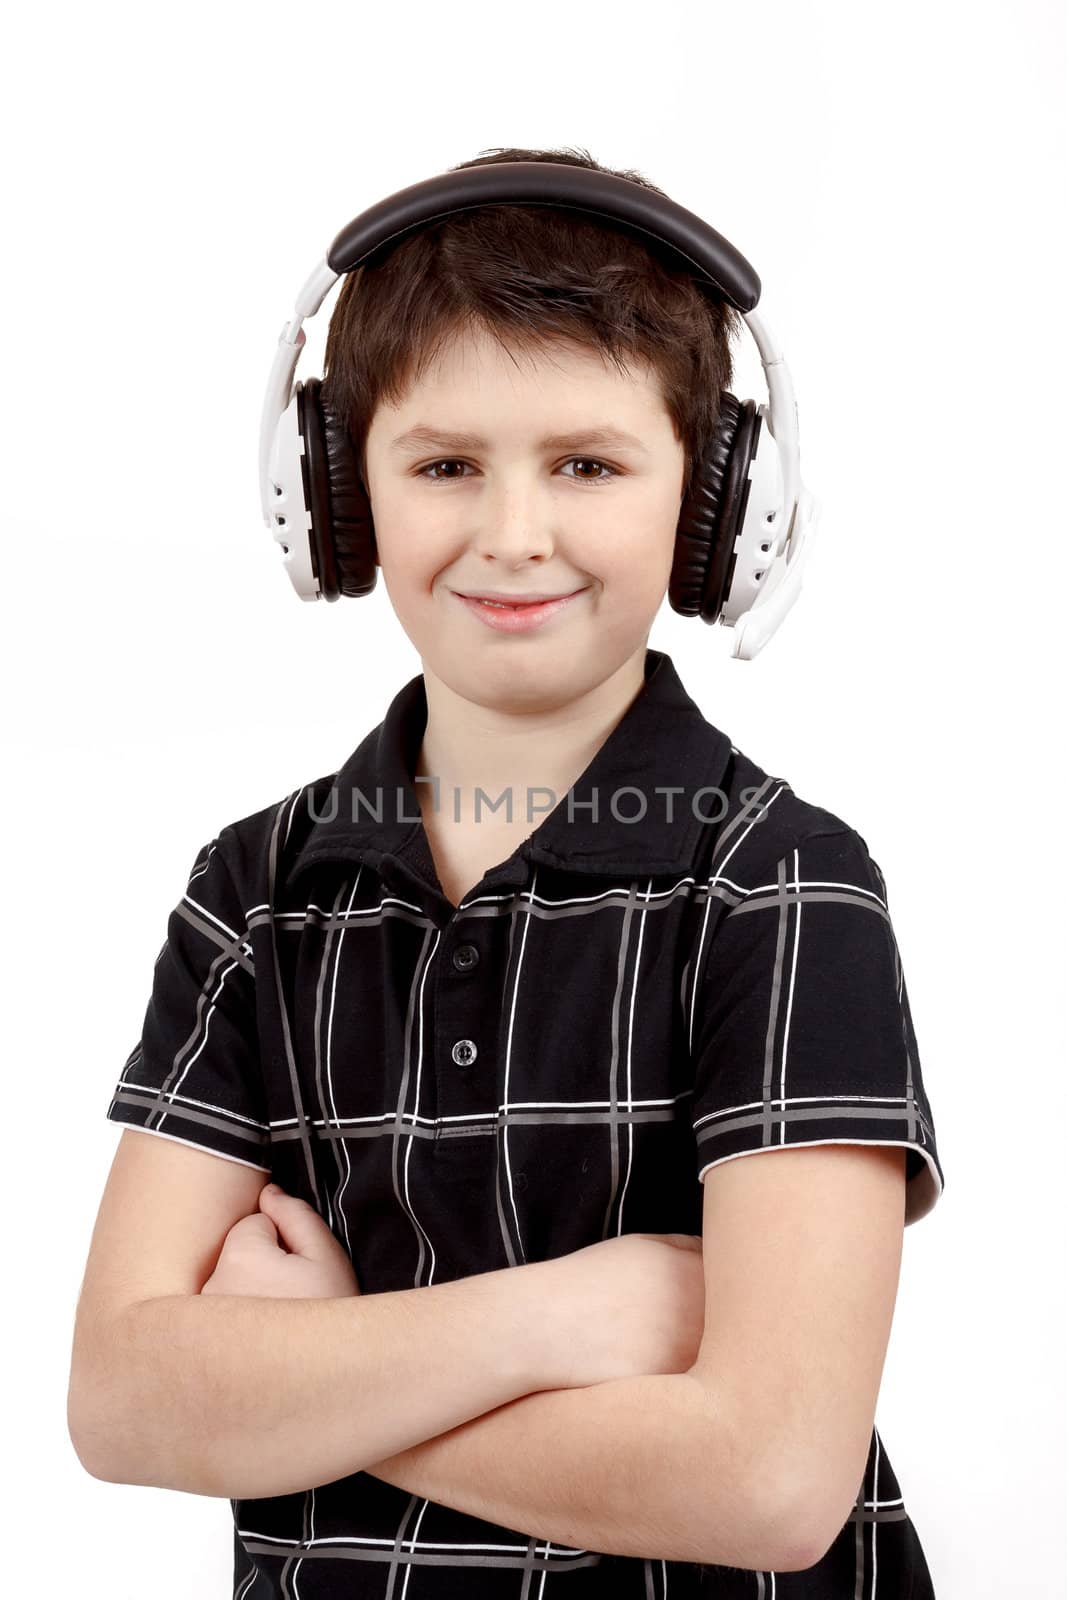 Portrait of a happy smiling young boy listening to music on headphones against white background 